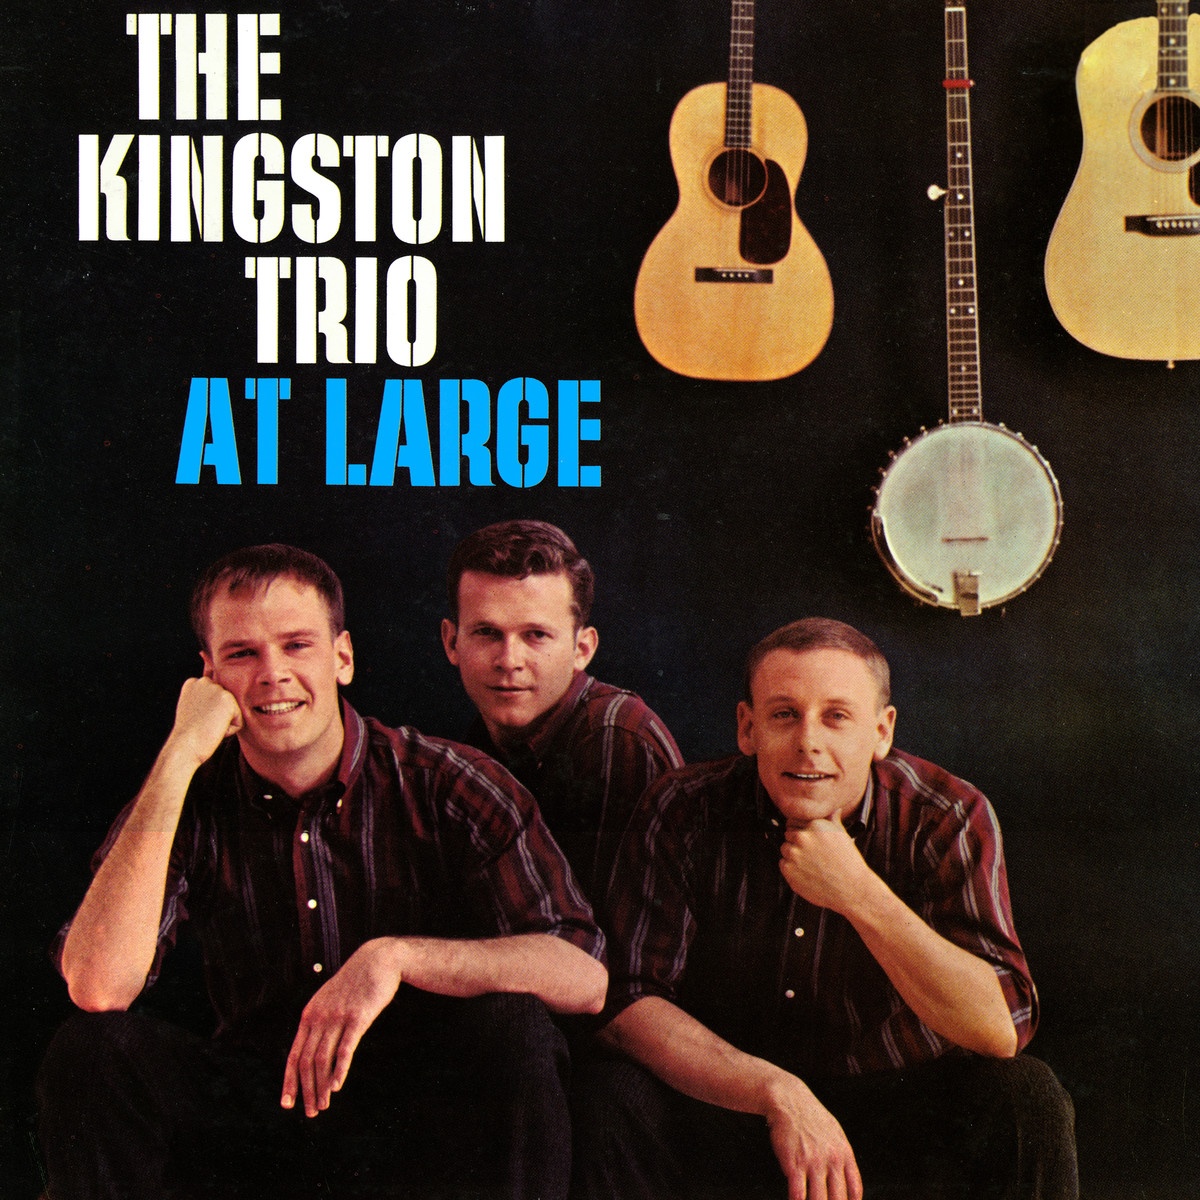 The Kingston Trio At Large